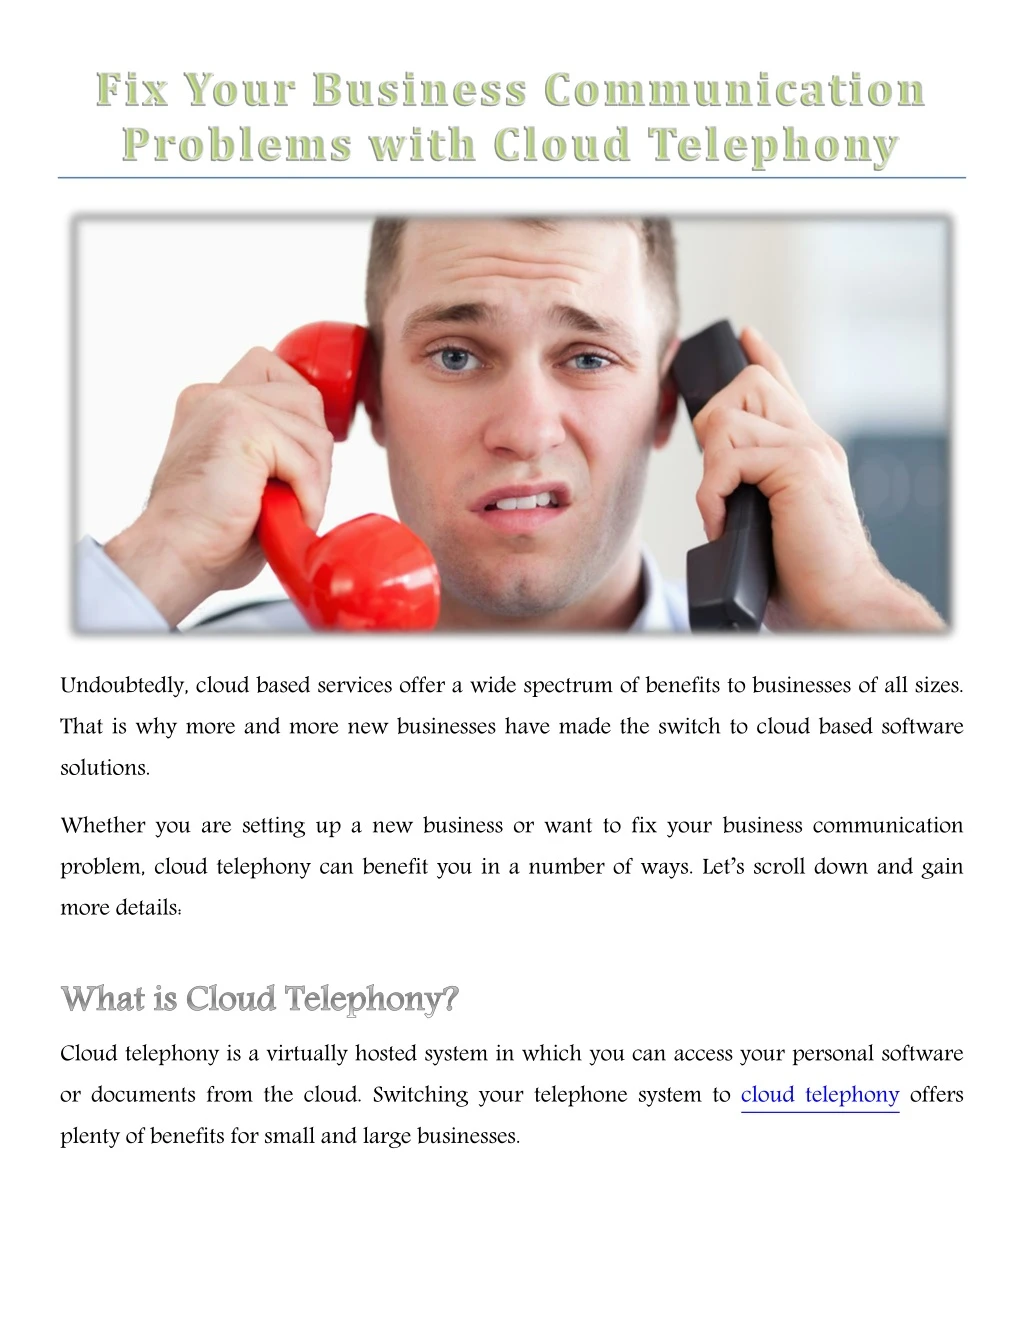 undoubtedly cloud based services offer a wide